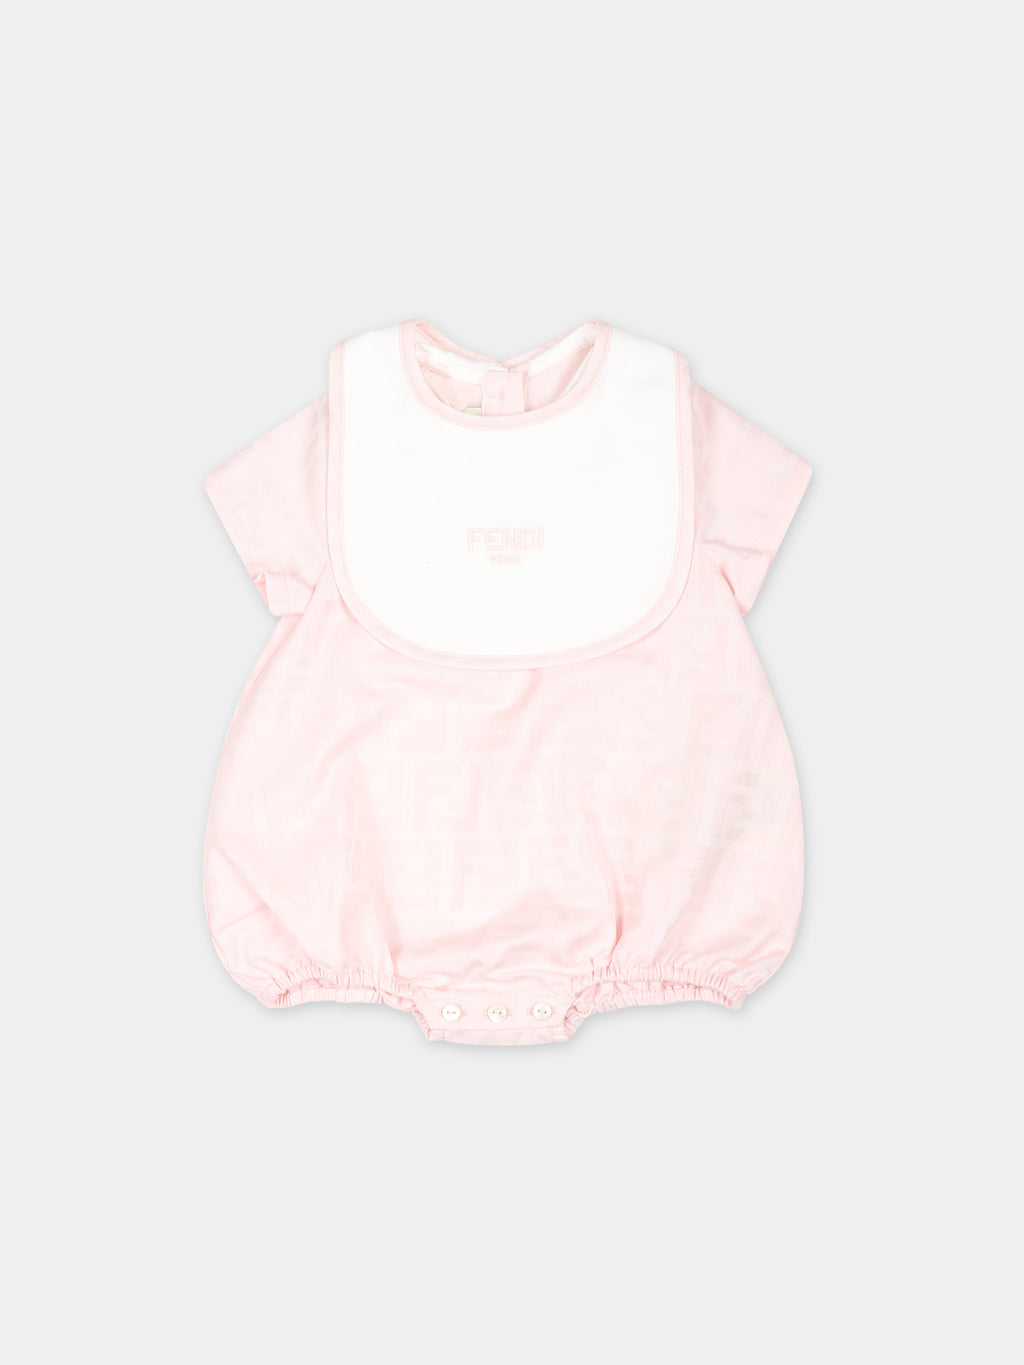 Pink romper set for baby girl with double F